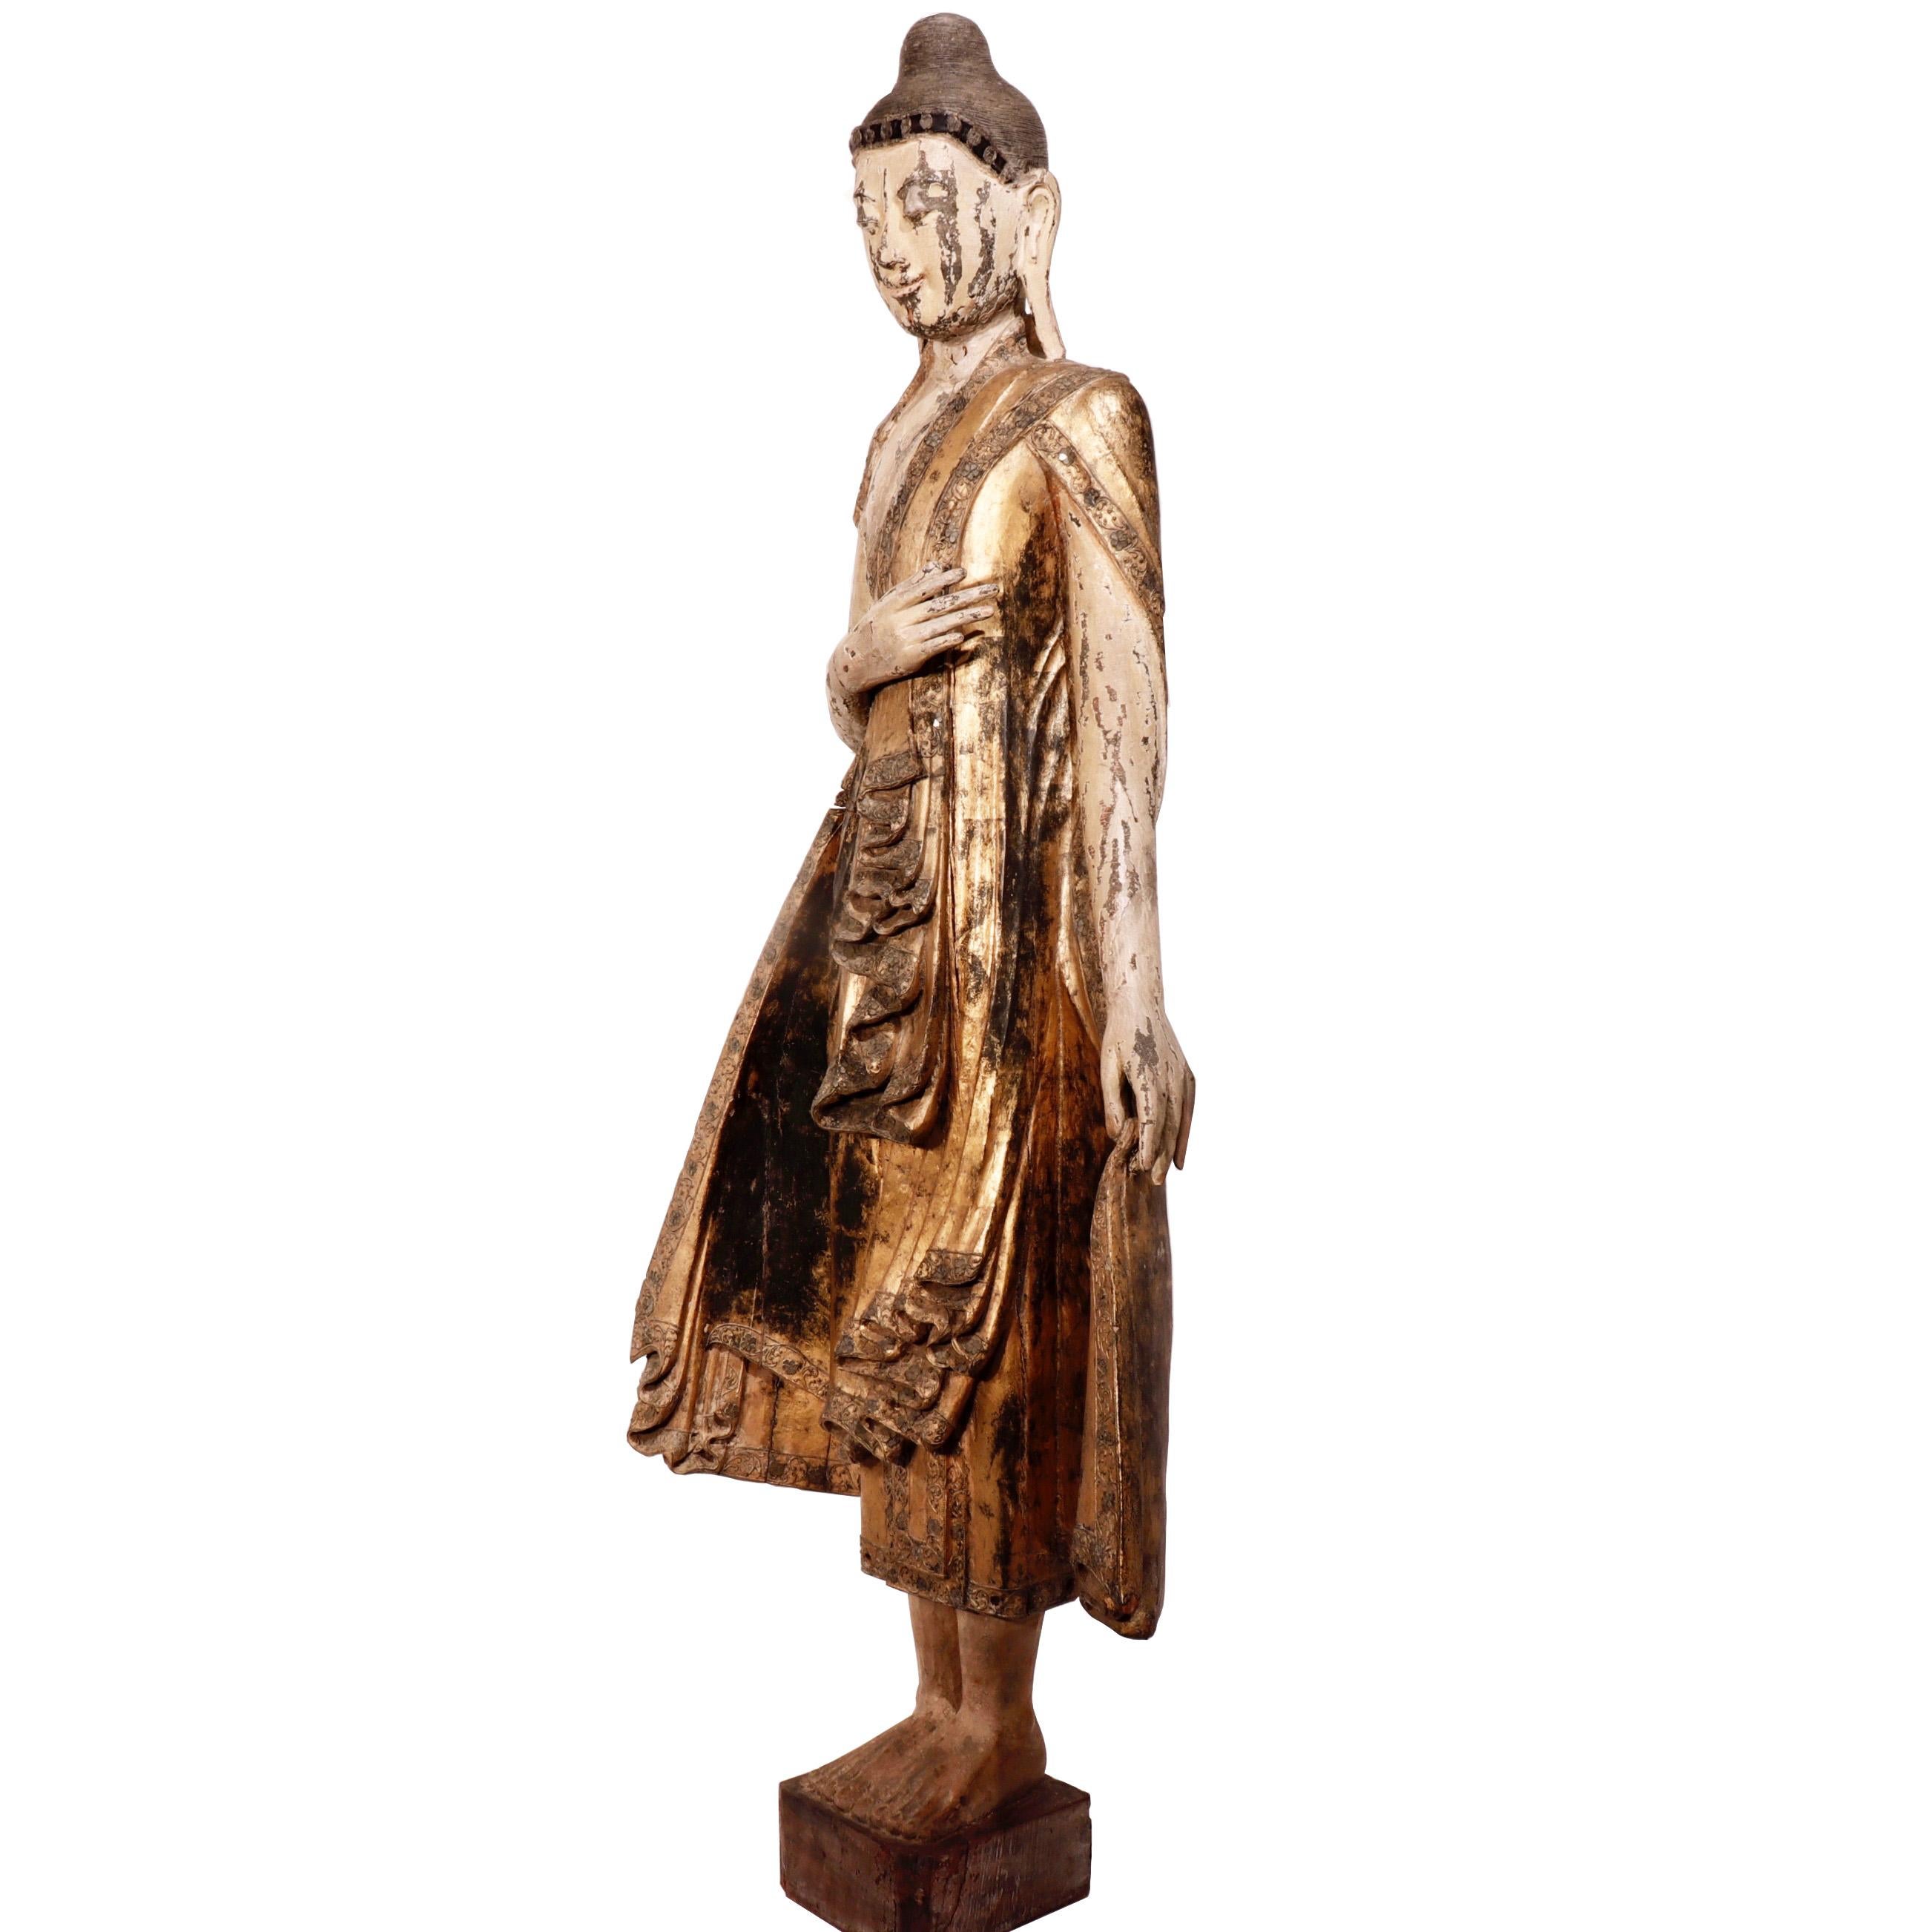 Burmese Mandalay carved wood figure of the standing Buddha on a square base, the left hand is in the varada or boon-granting mudra, the right held up towards the chest, costumed in edge-decorated robe with glass insets, resembling a cape with the